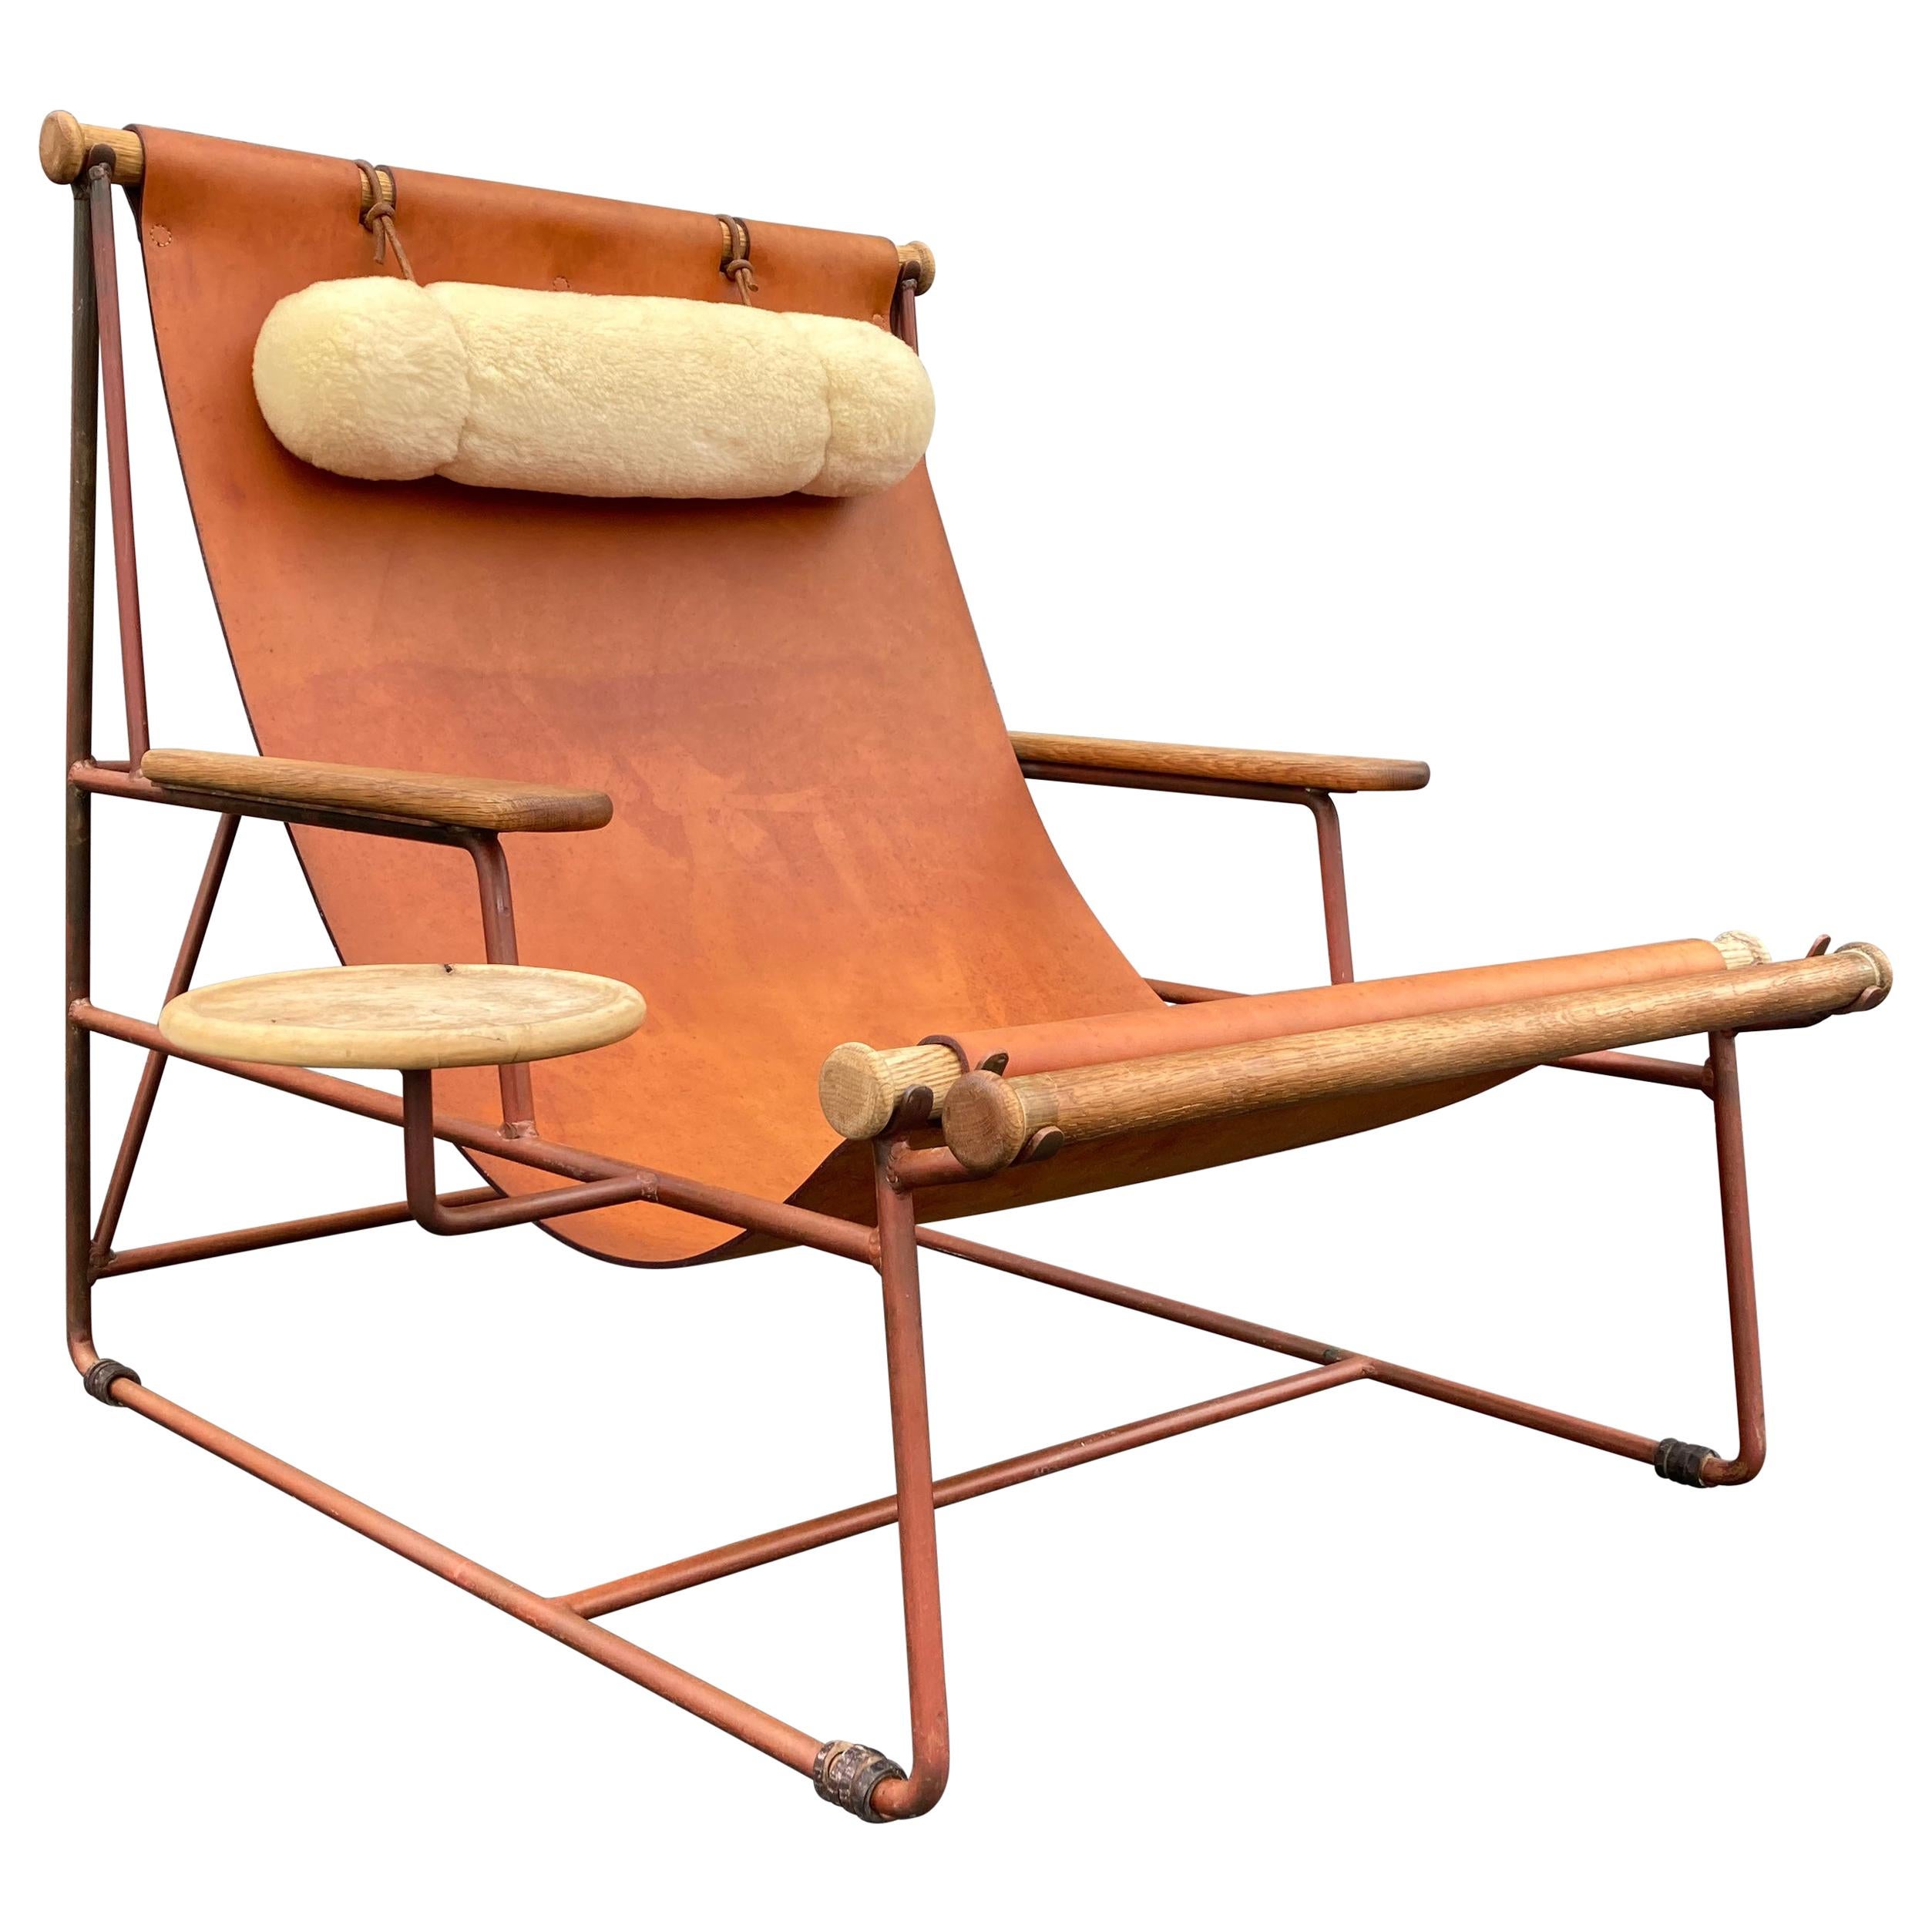 Beautiful Deck Lounge Chair Designed by Tyler Hays and Made by BDDW, Leather